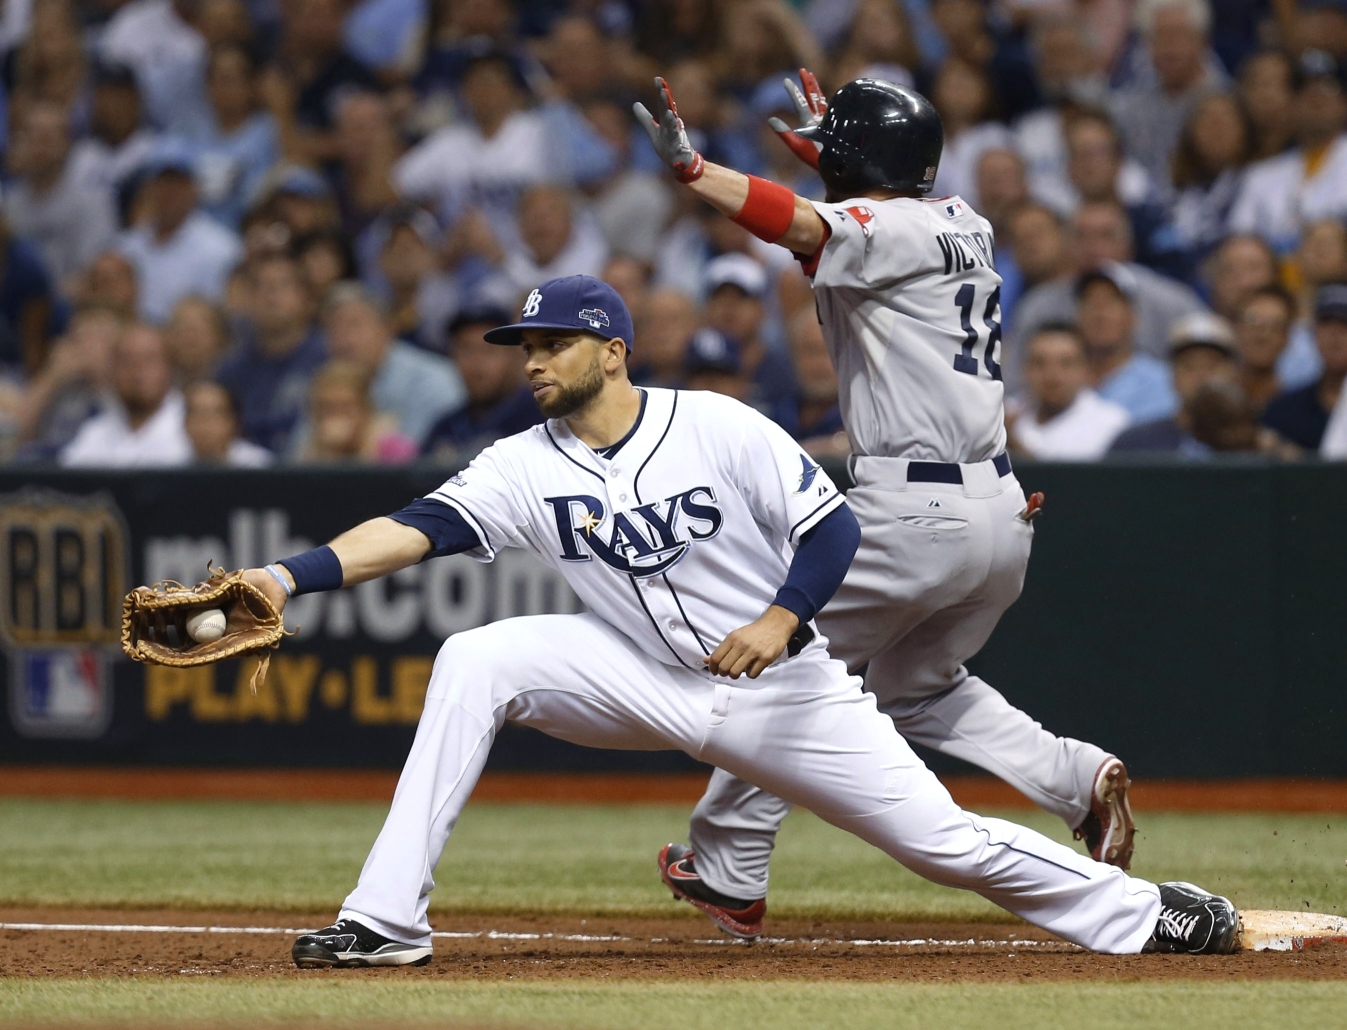 Red Sox's Shane Victorino on first base as Rays first baseman James Loney catches the throw. Photo: AP